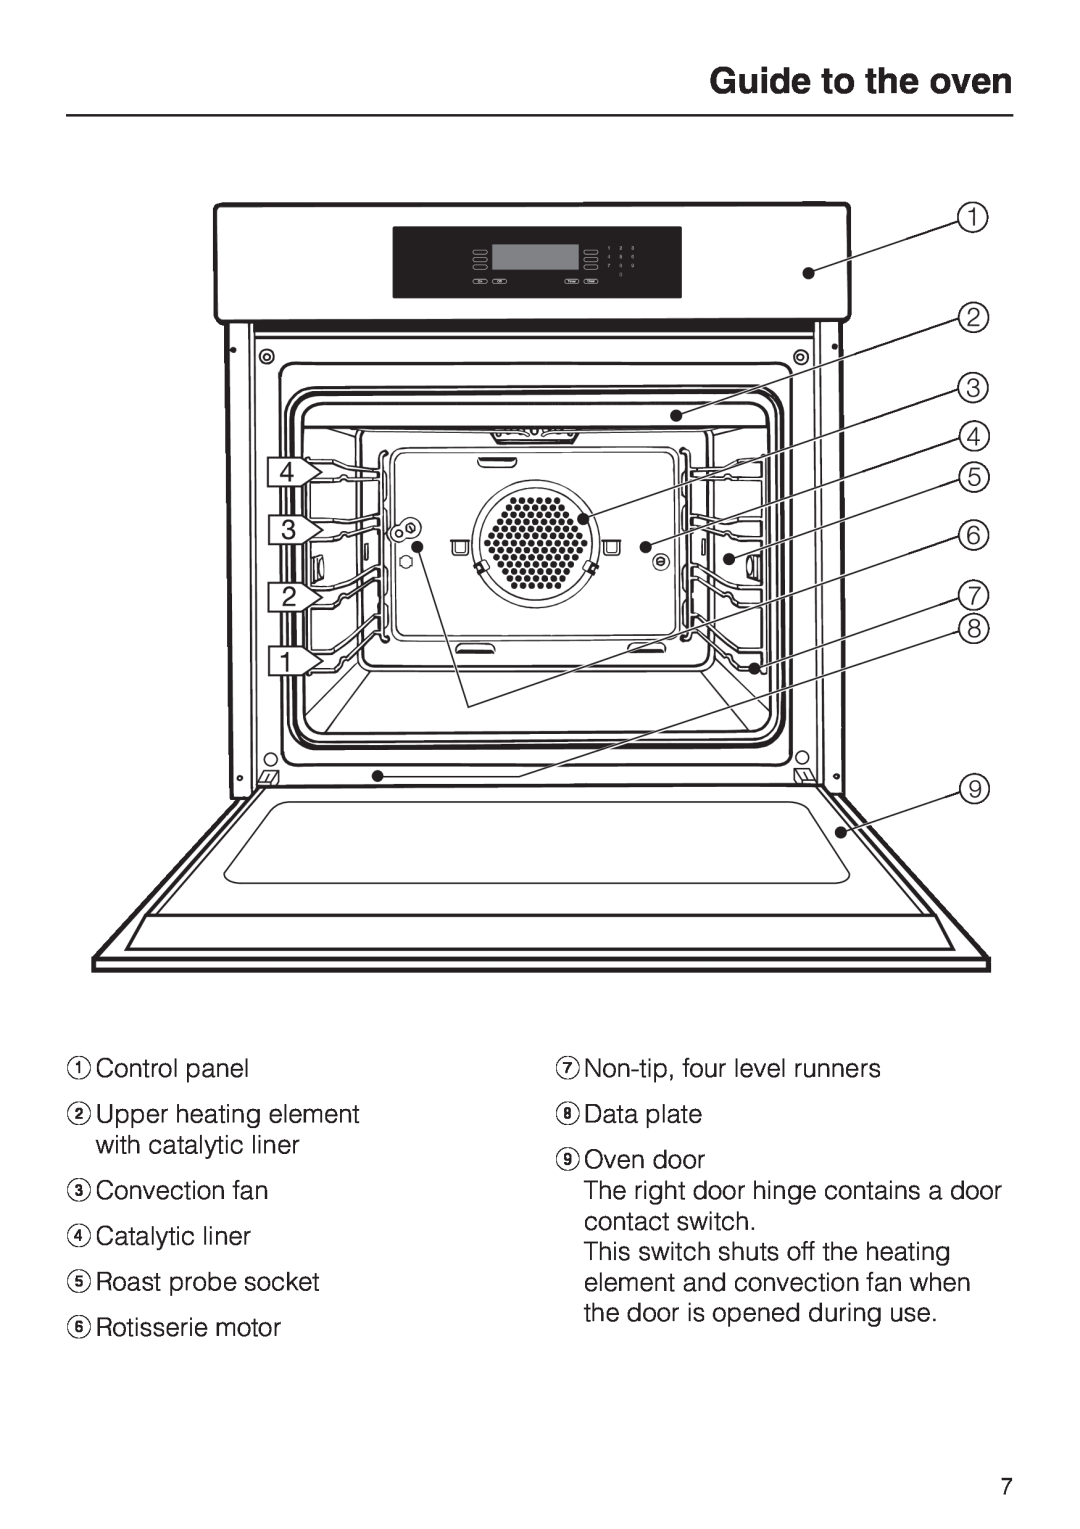 Miele H4680B Guide to the oven, aControl panel, bUpper heating element with catalytic liner, iOven door 